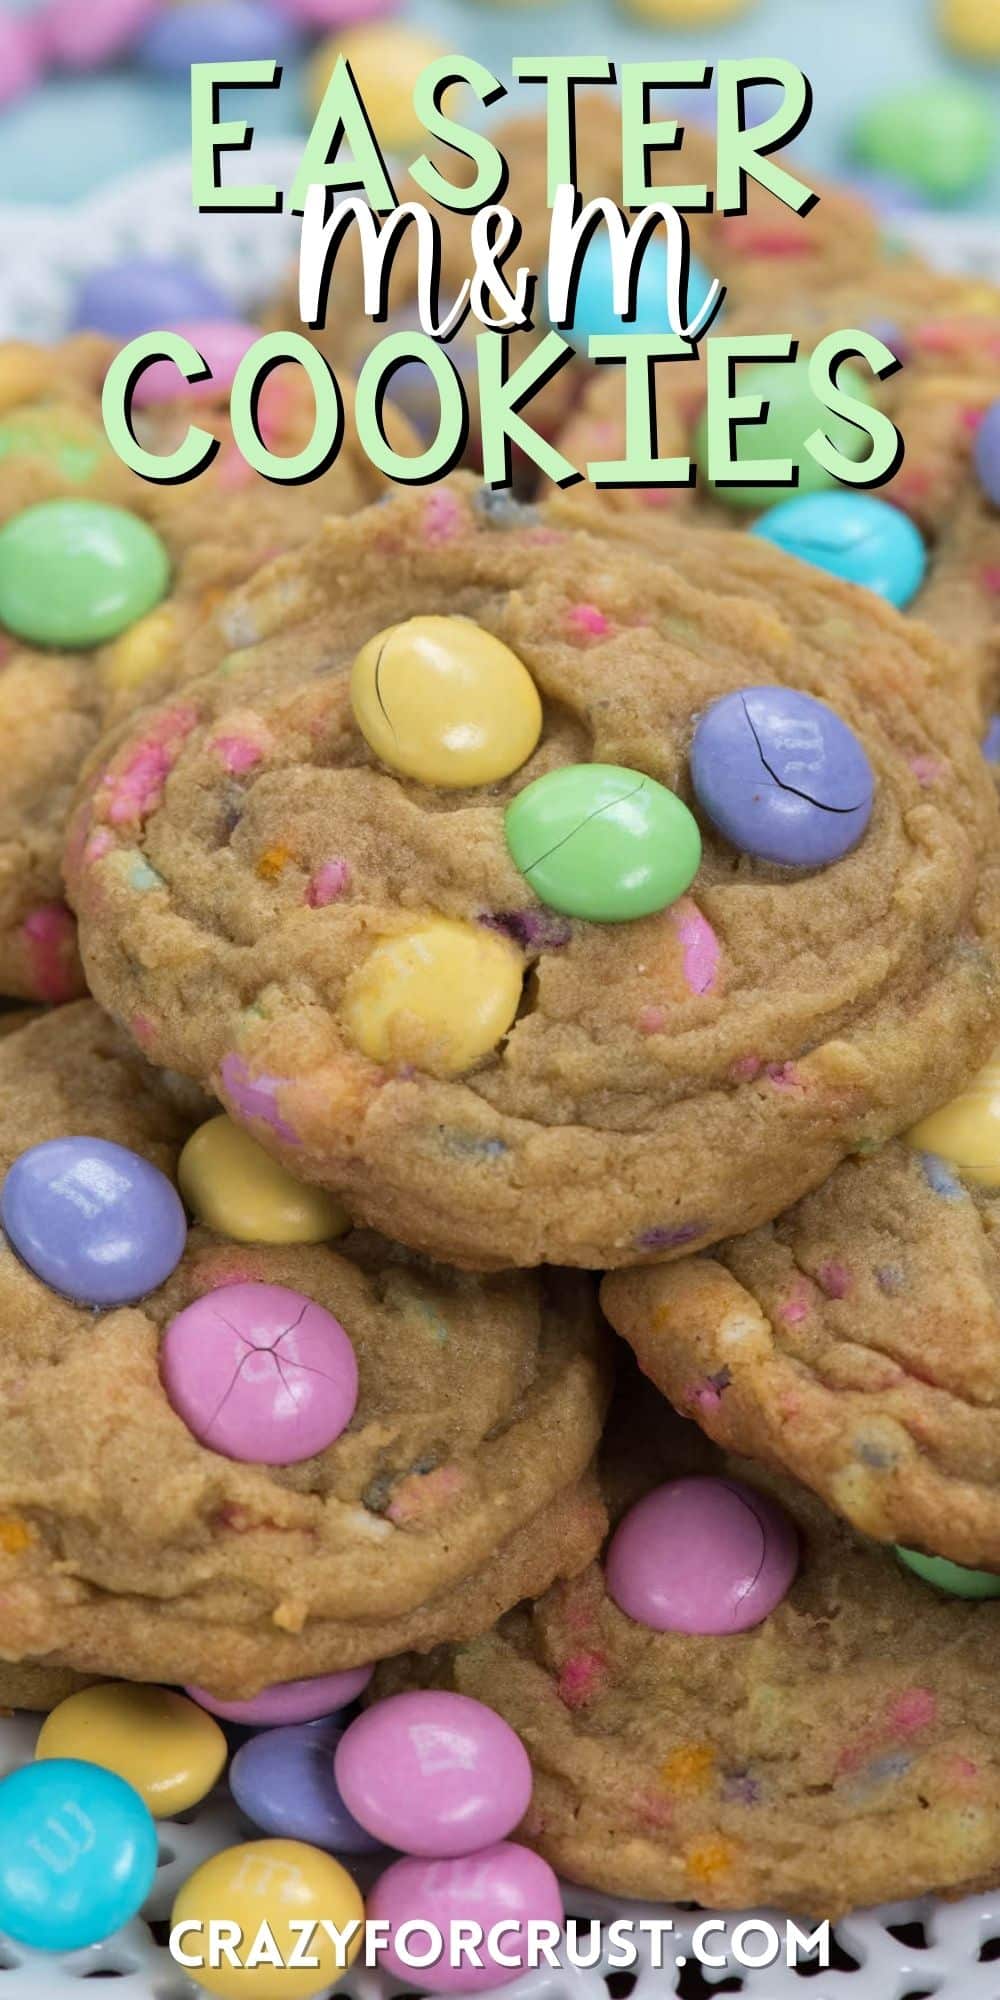 cookies with light purple, yellow, pink and green M&Ms baked into the cookies with words on the photo.